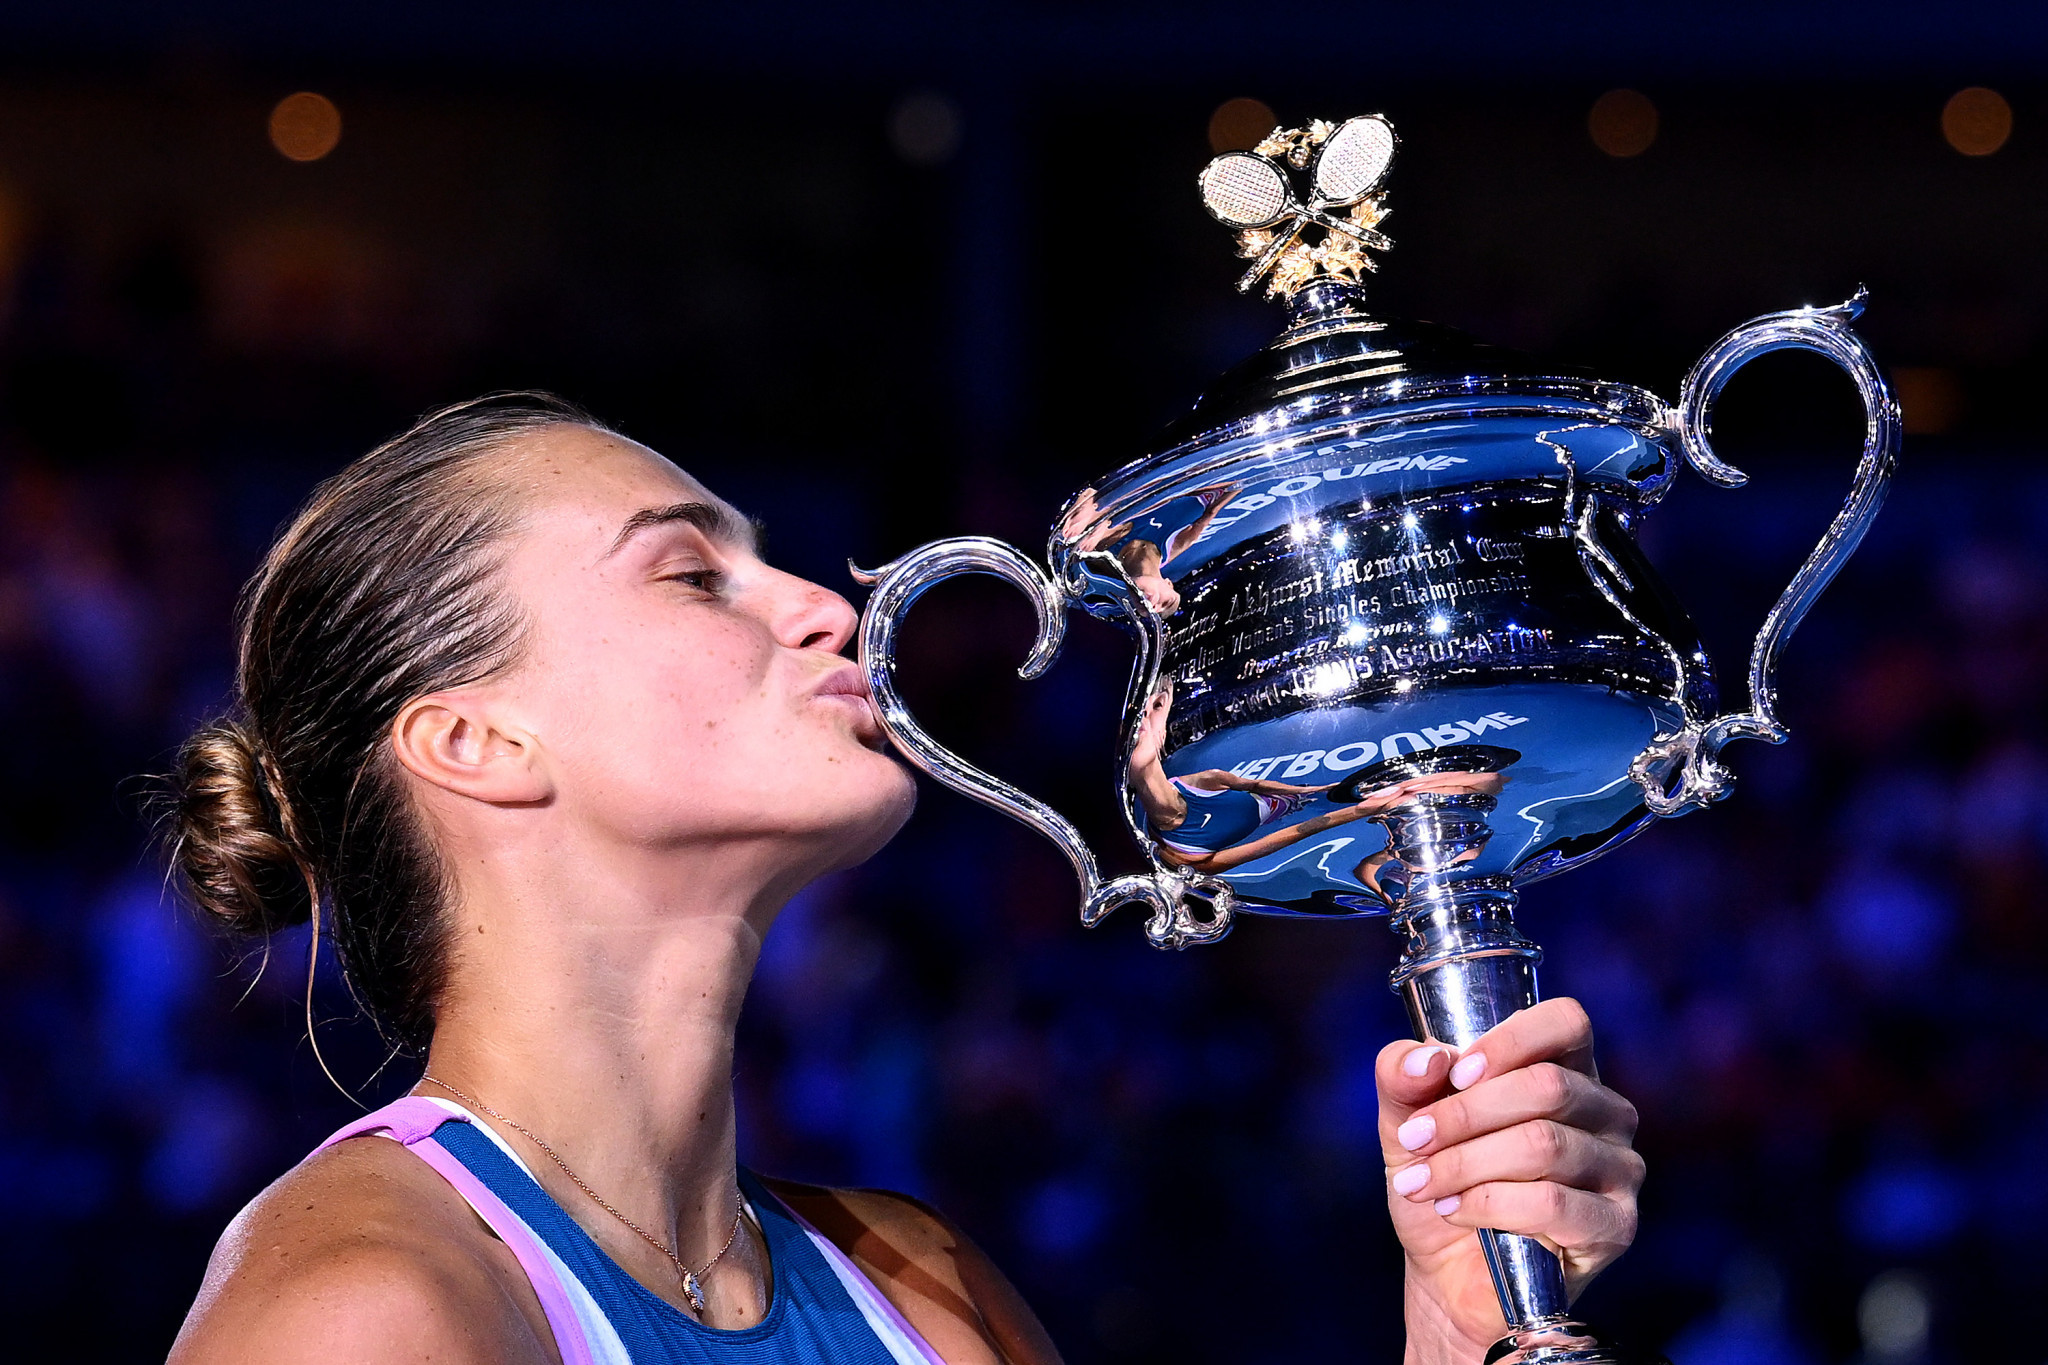 Aryna Sabalenka, playing as a neutral, came from a set down to defeat Elena Rybakina in the Australian Open women's singles final ©Getty Images